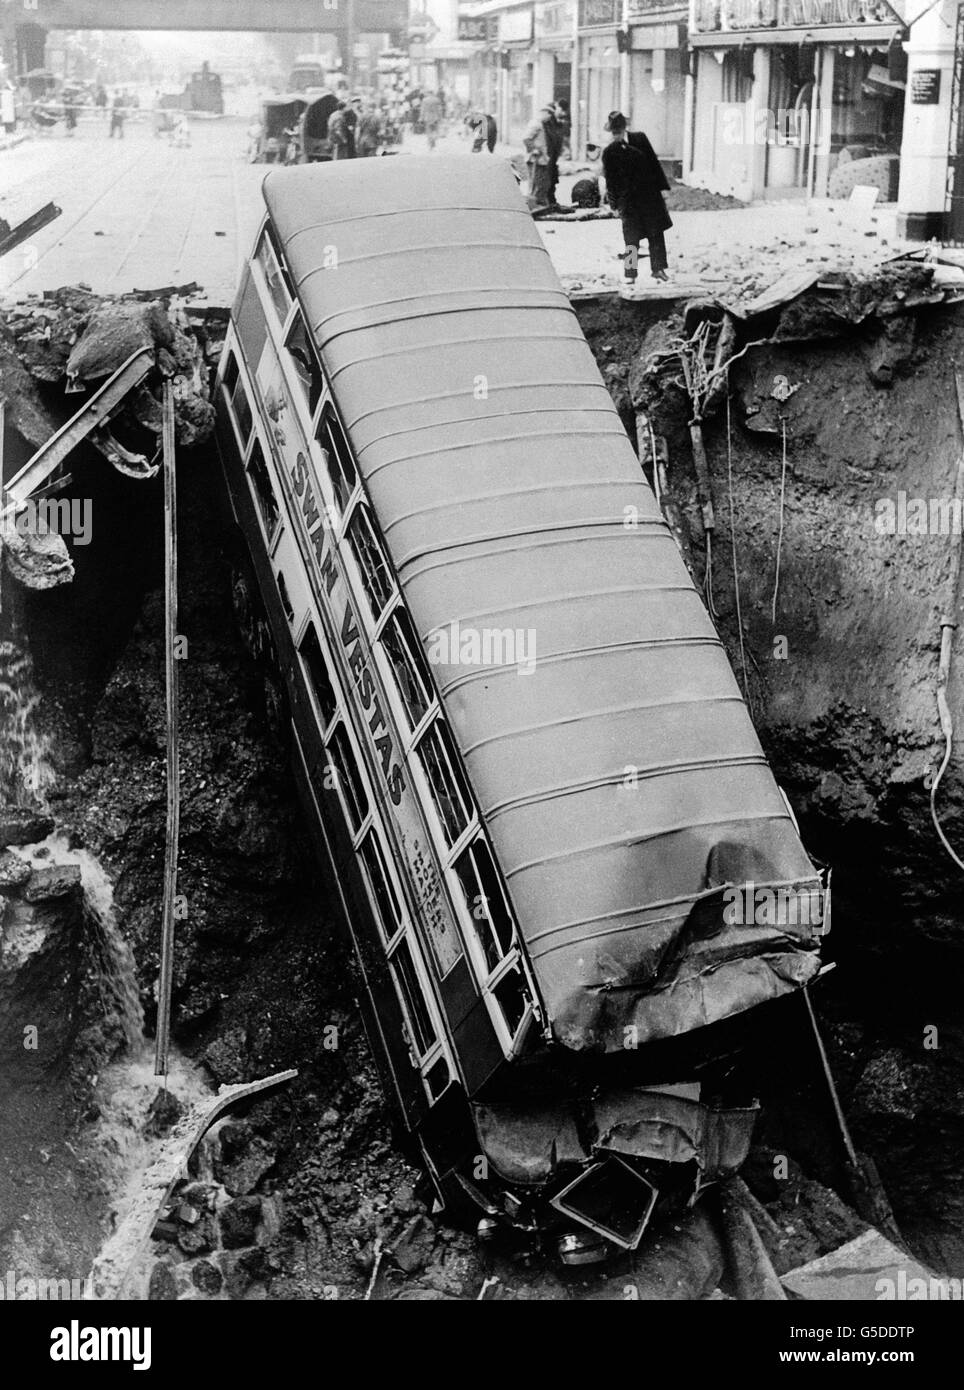 A bus lies in a crater in Balham, south London, following a night-time bomb blast during the blitz. Stock Photo